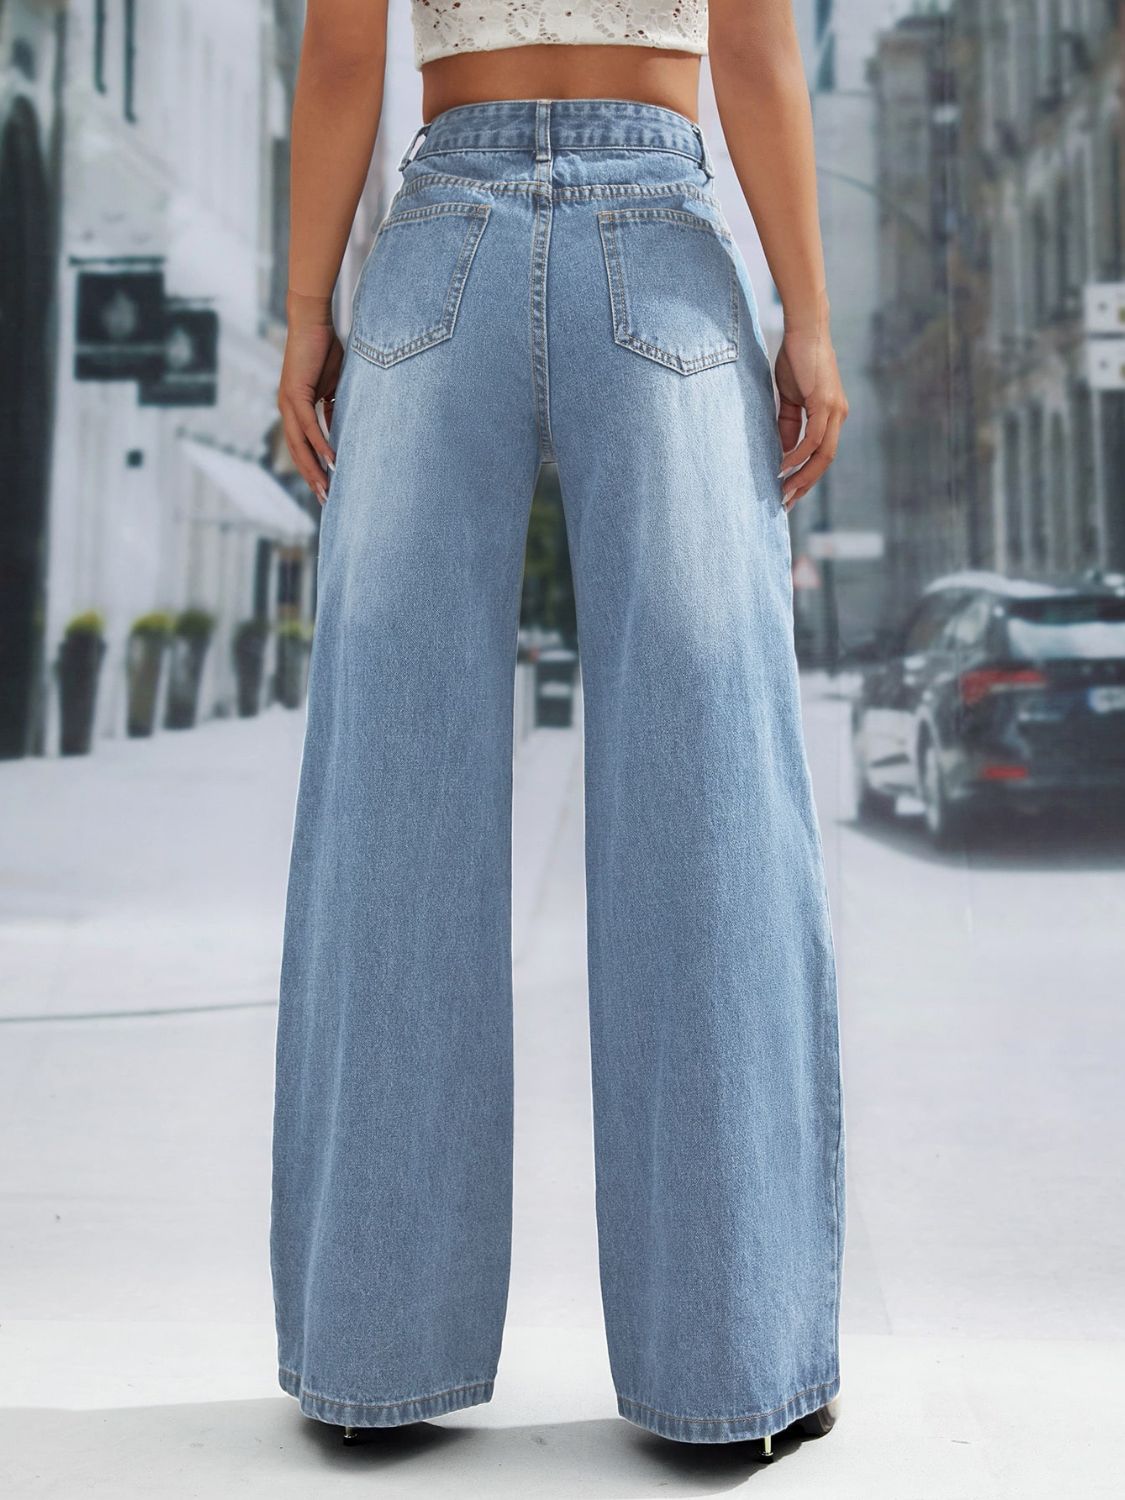 Light Slate Gray Wide Leg Jeans with Pockets Sentient Beauty Fashions Apparel & Accessories